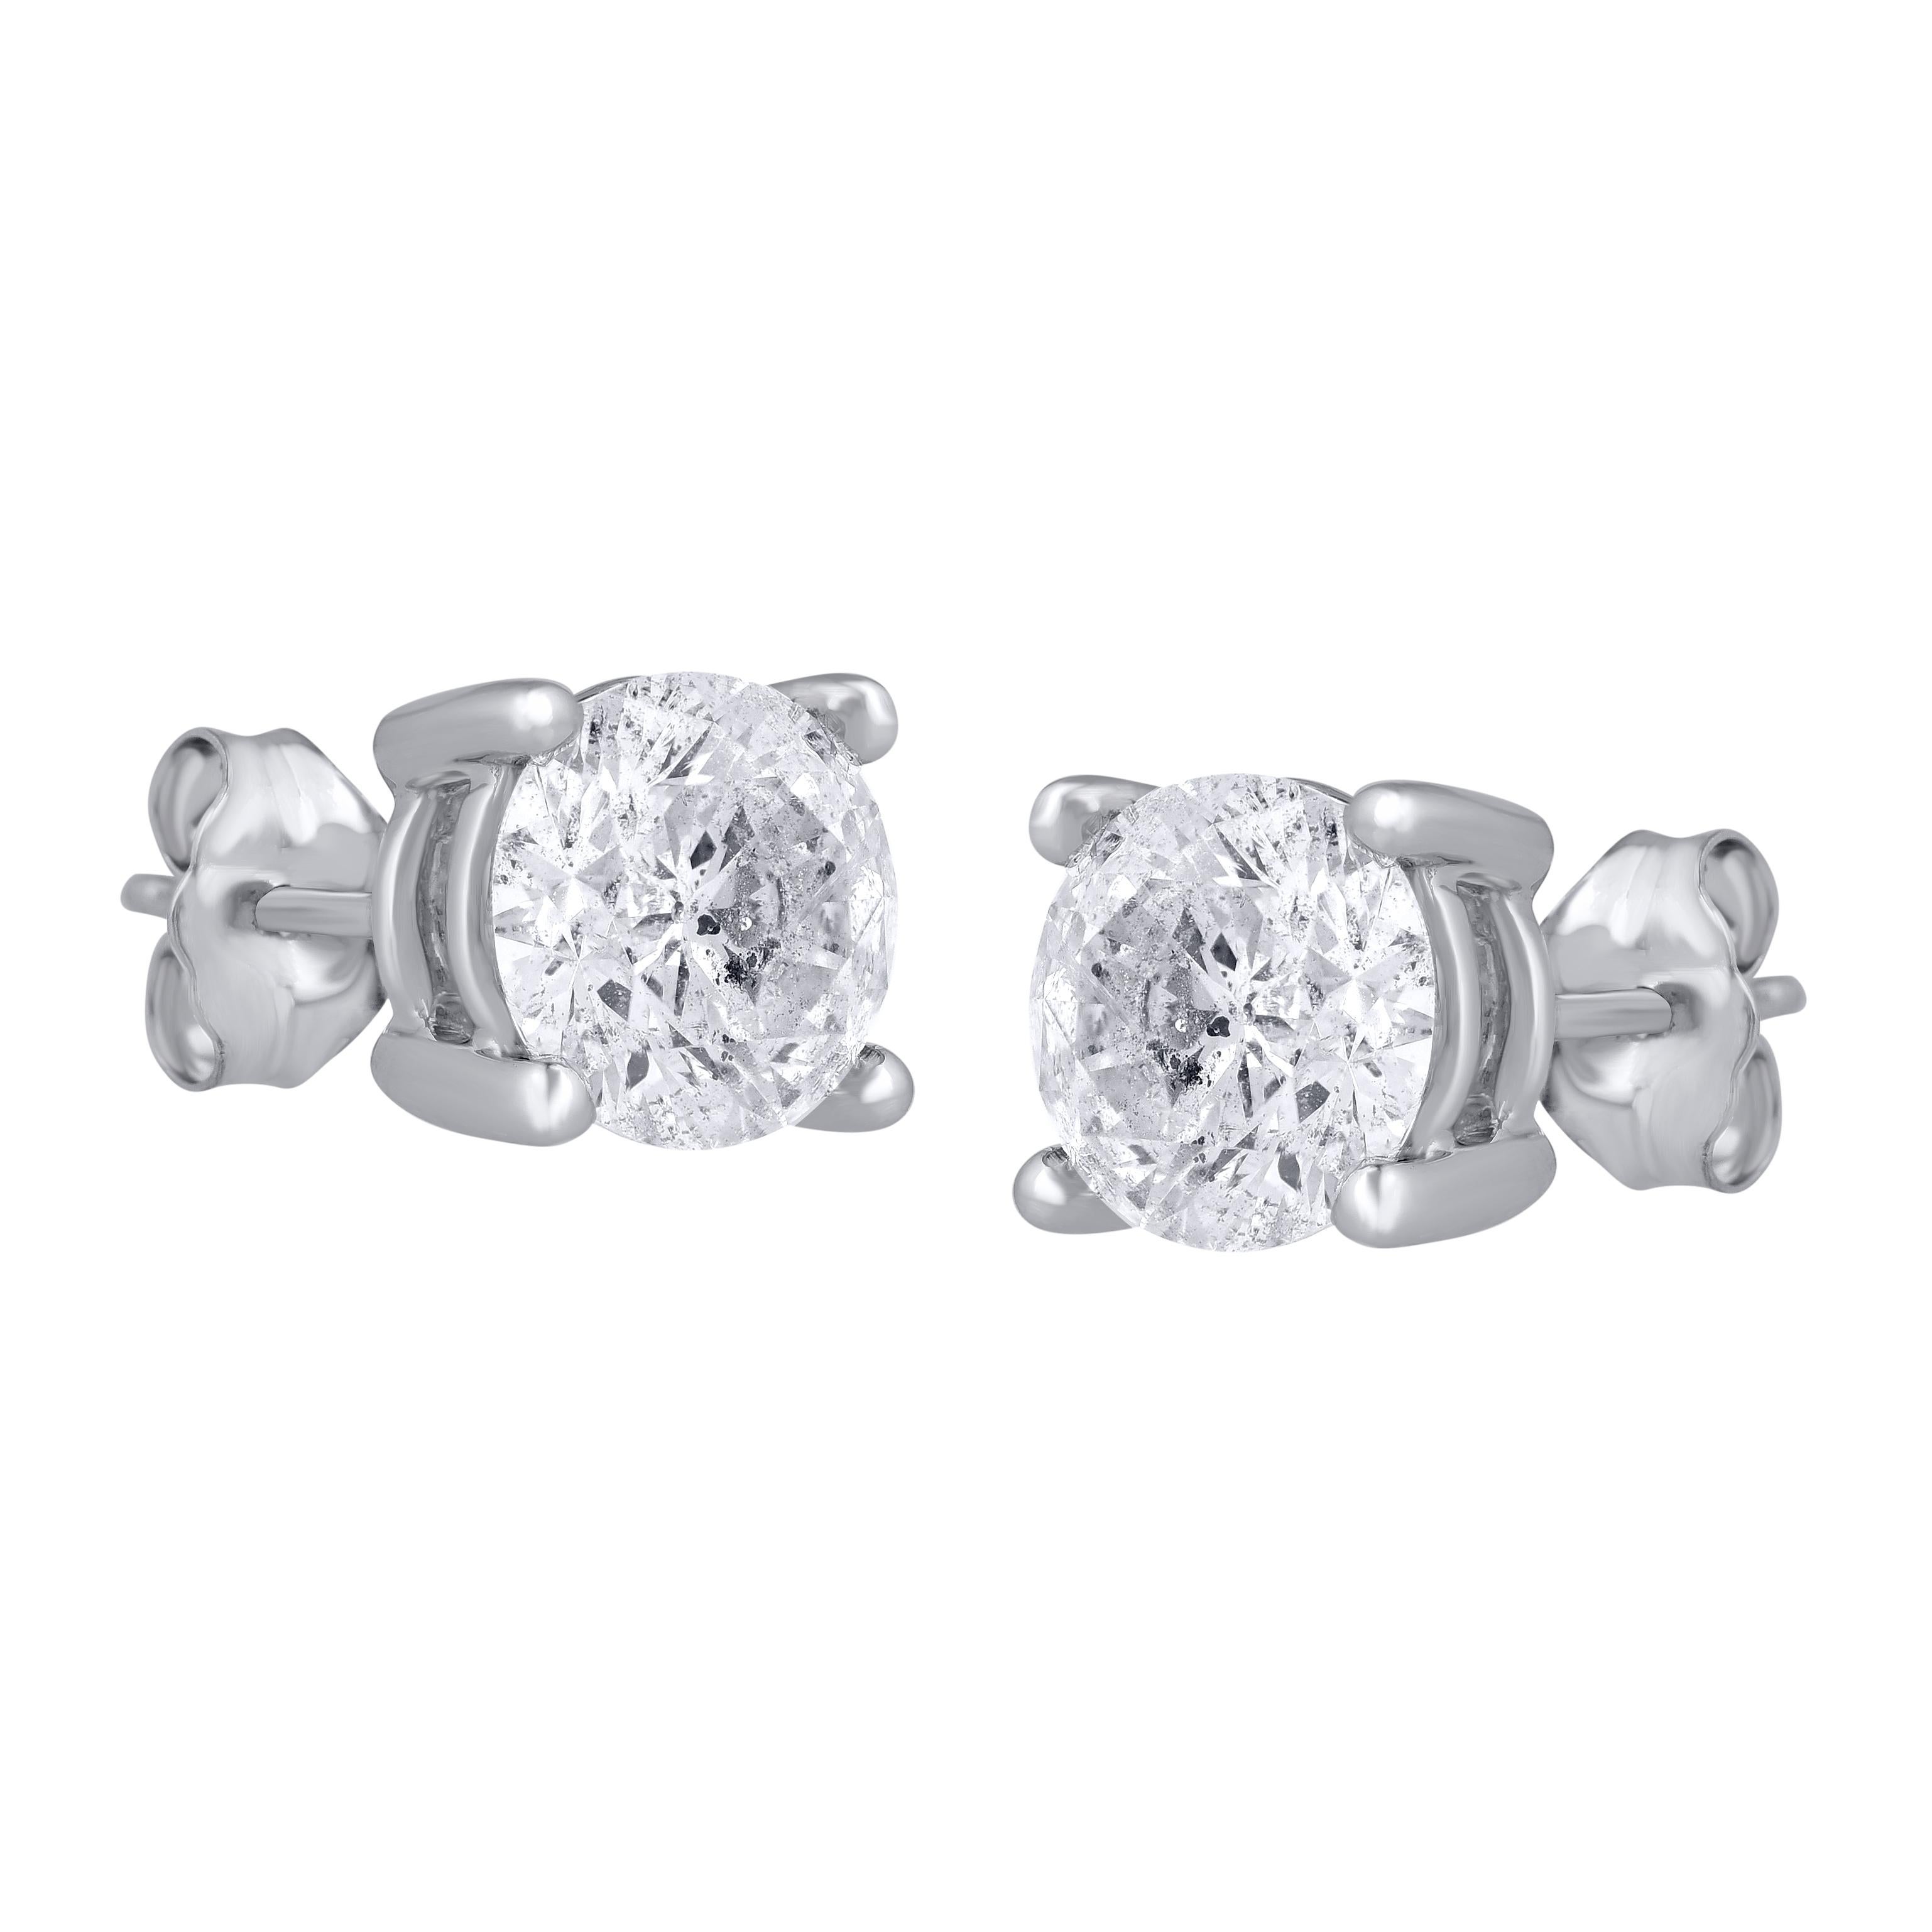 These classic solitaire stud earrings in prong setting are handcrafted in 18Kt white gold and the diamonds are graded HI Color, I2 Clarity. These Stud earrings are secure comfortably with friction back. 

These earrings will come along with an IGI